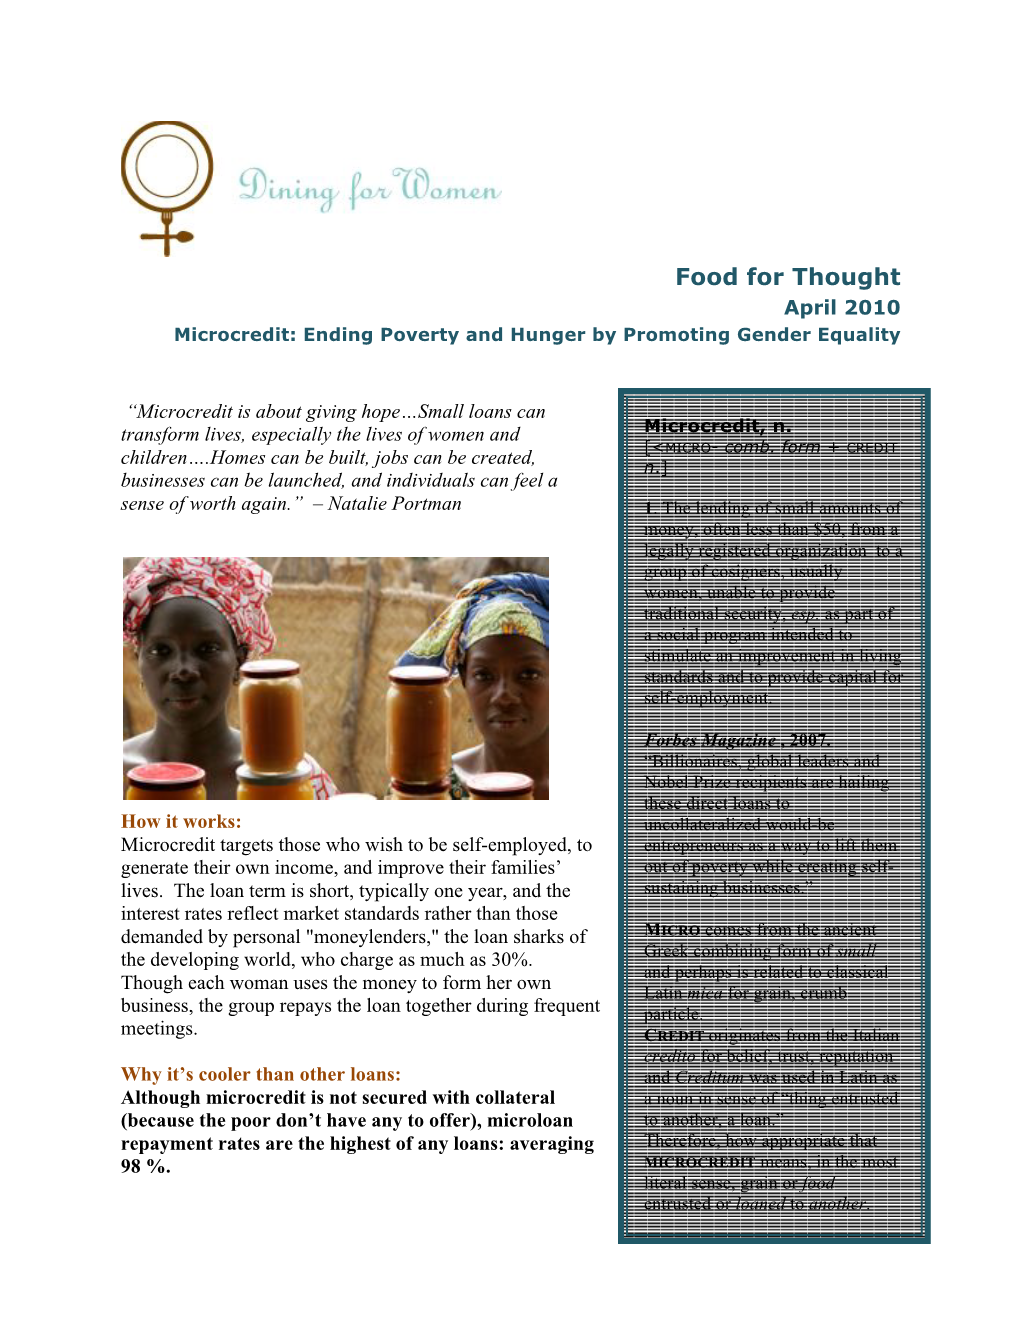 Food for Thought April 2010 Microcredit: Ending Poverty and Hunger by Promoting Gender Equality